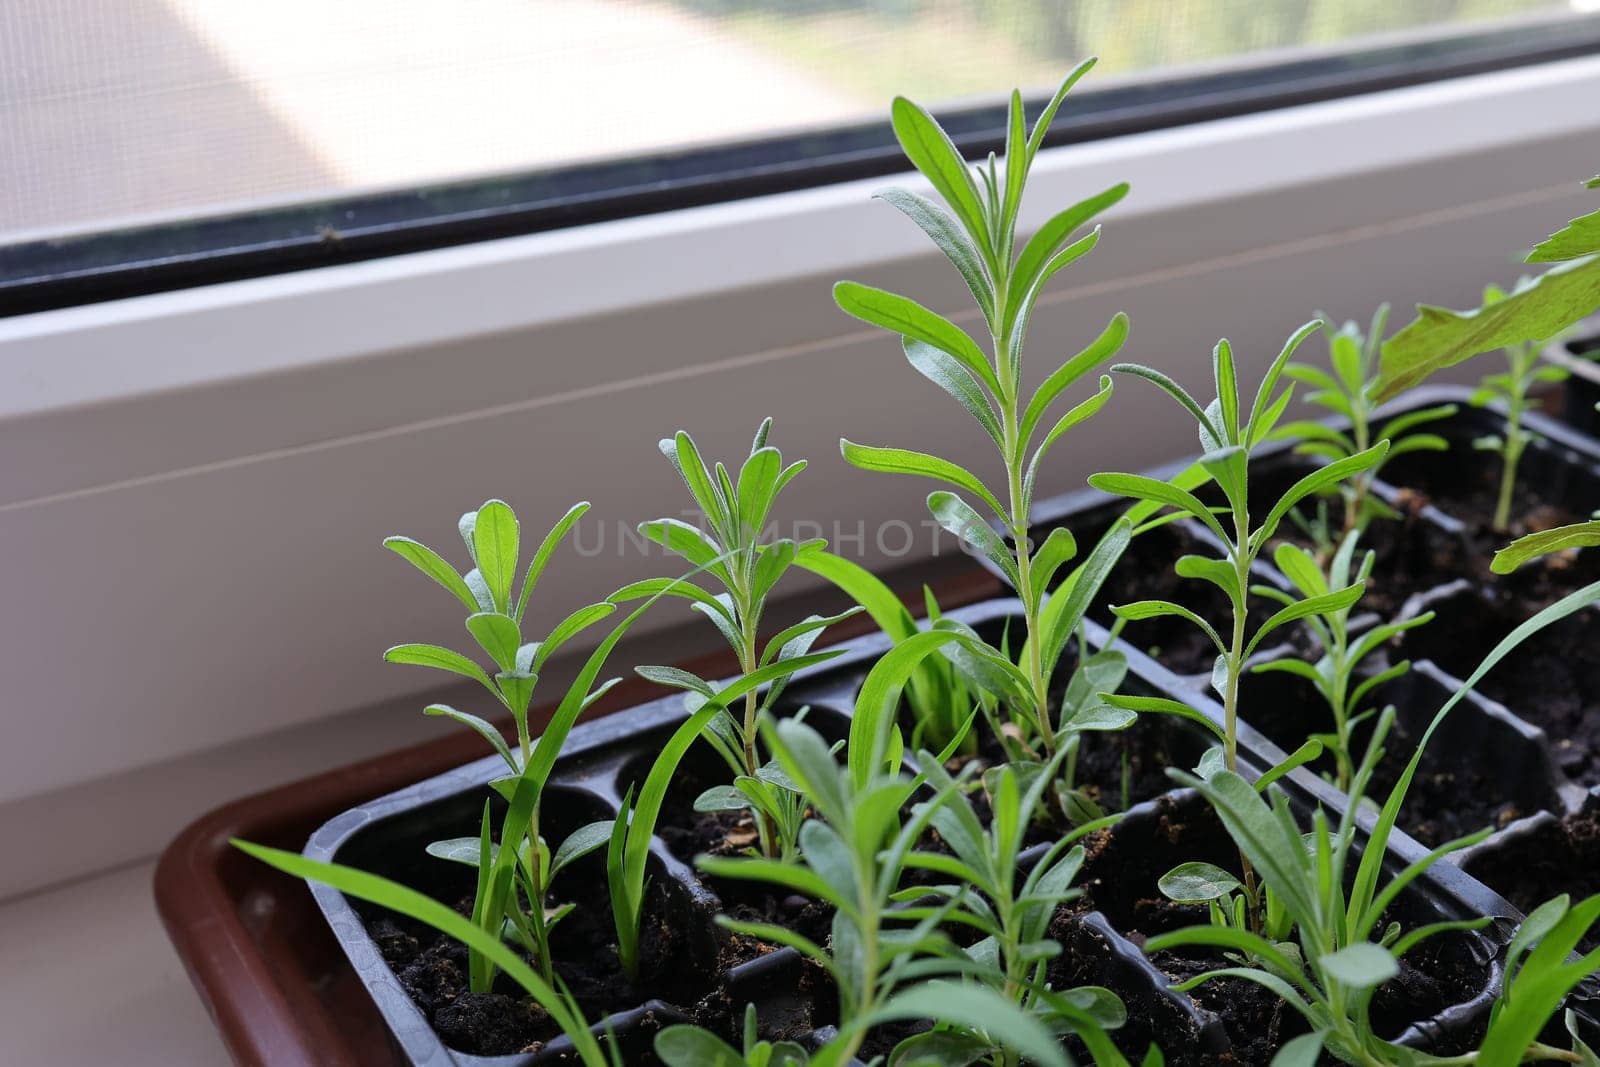 Lavender seedlings grown at home from seeds are planted in special containers on the windowsill. Gardening and vegetable gardening concept. by Proxima13